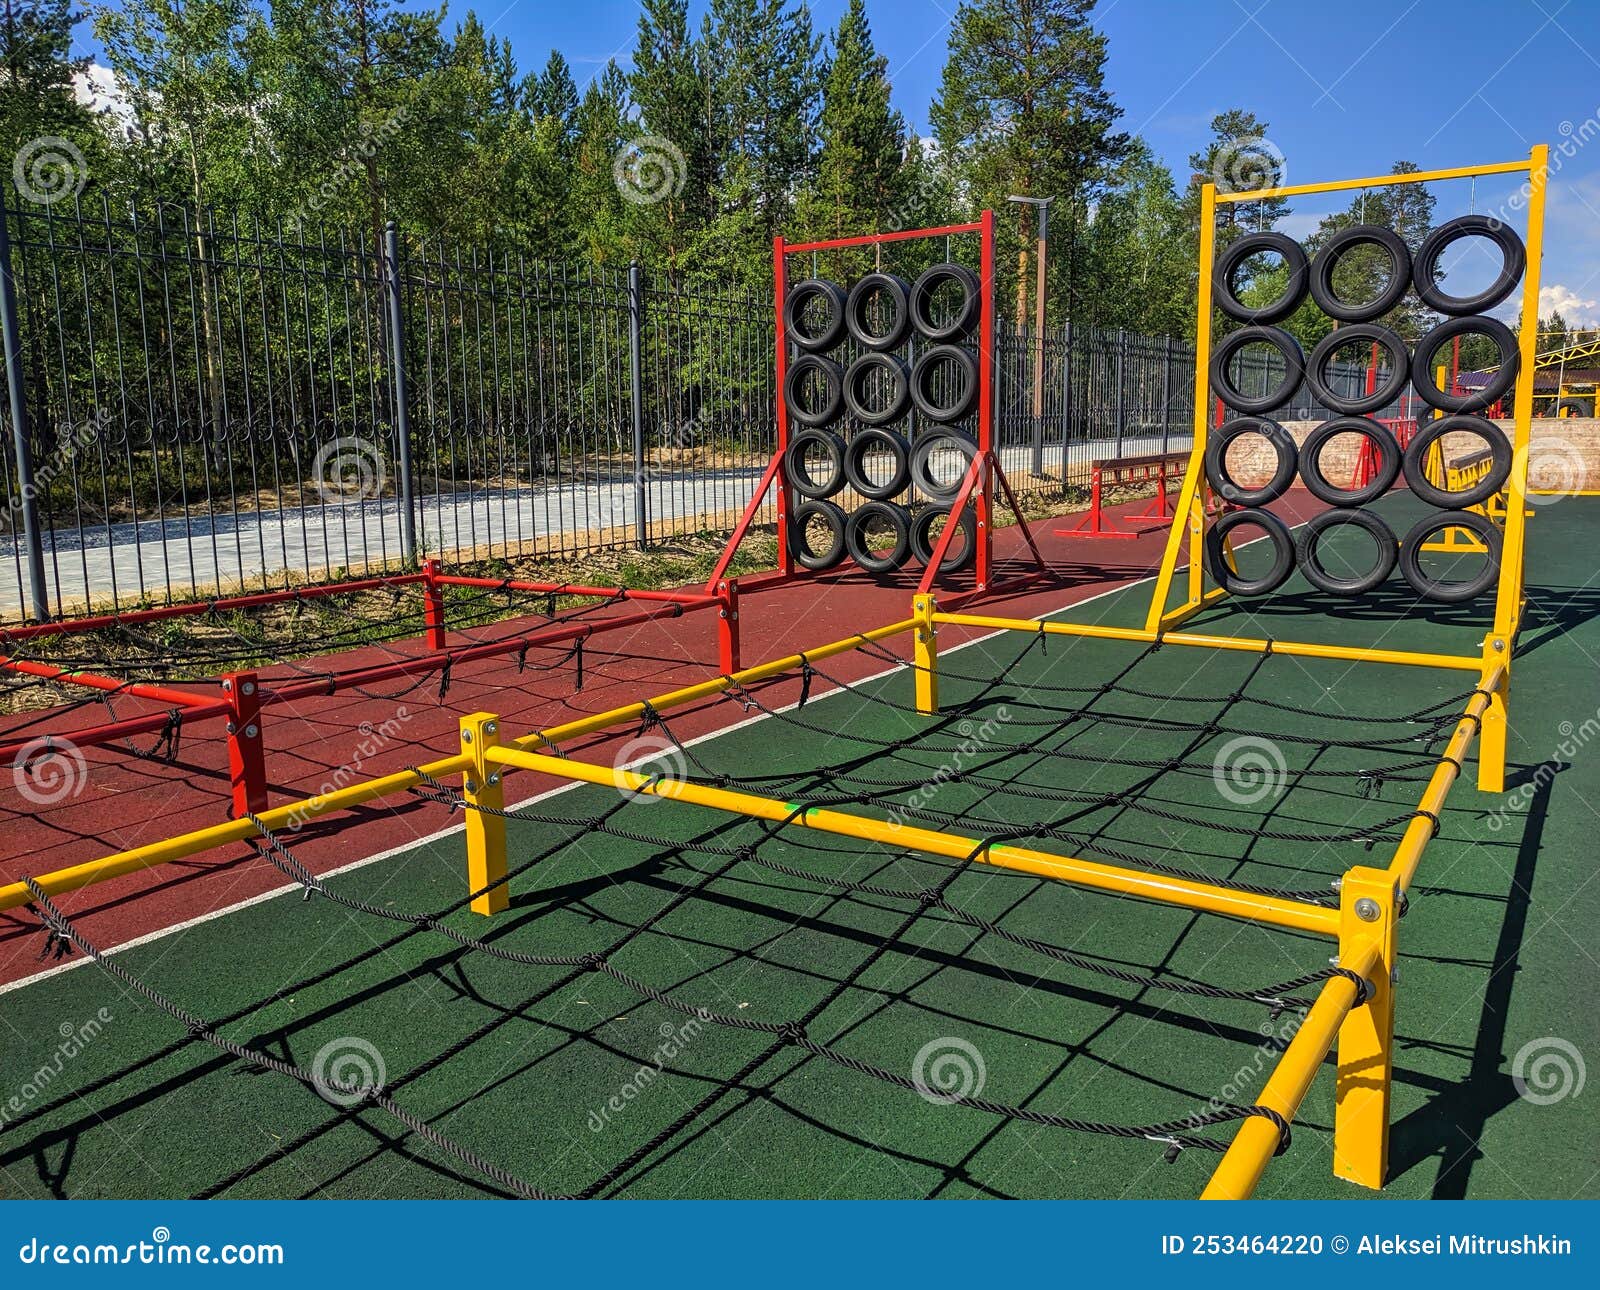 Noyabrsk, Russia - July 17 2022: View of the Obstacle Course Installed